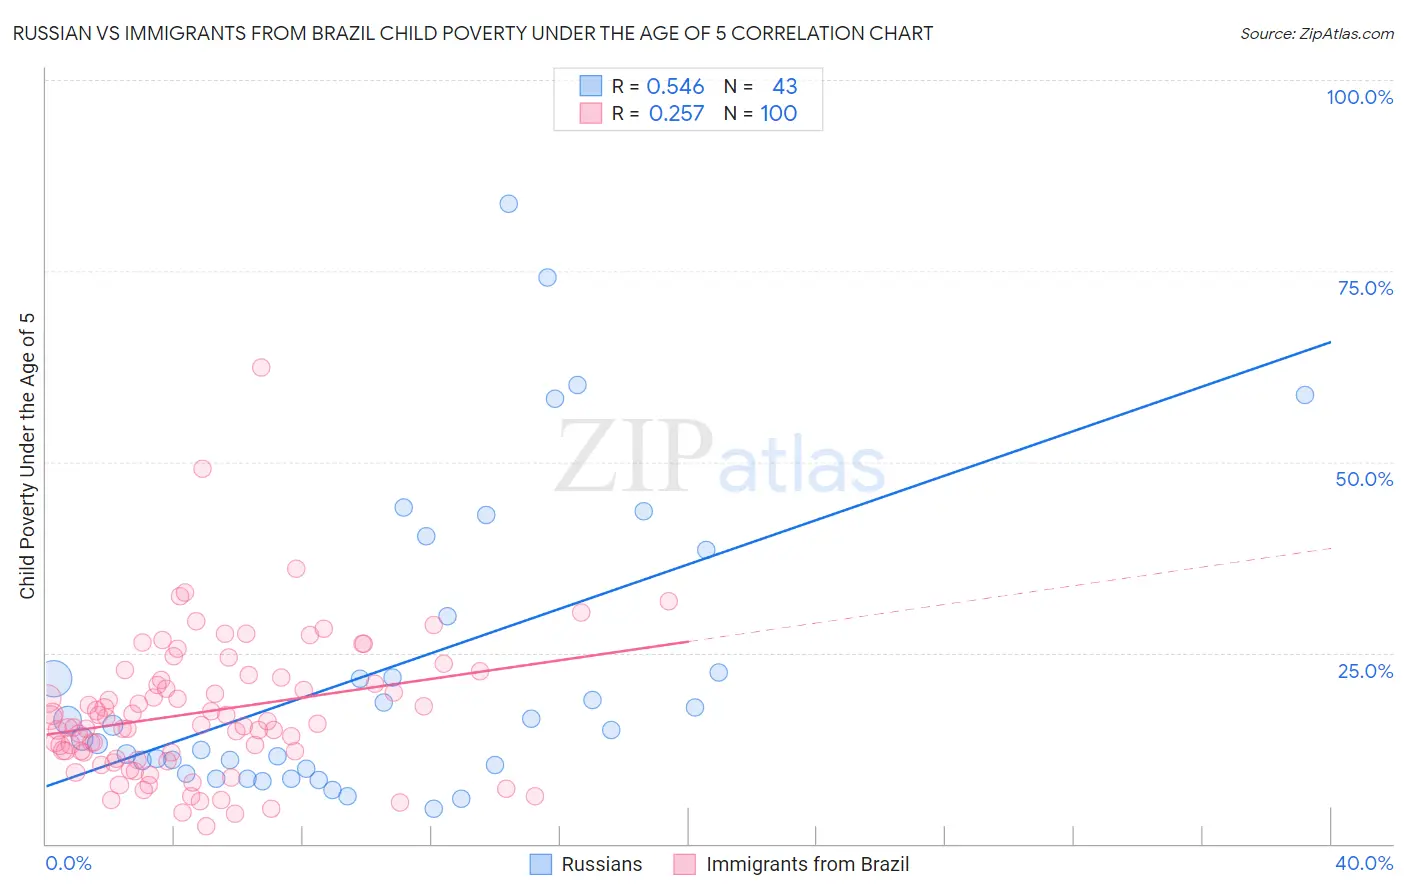 Russian vs Immigrants from Brazil Child Poverty Under the Age of 5